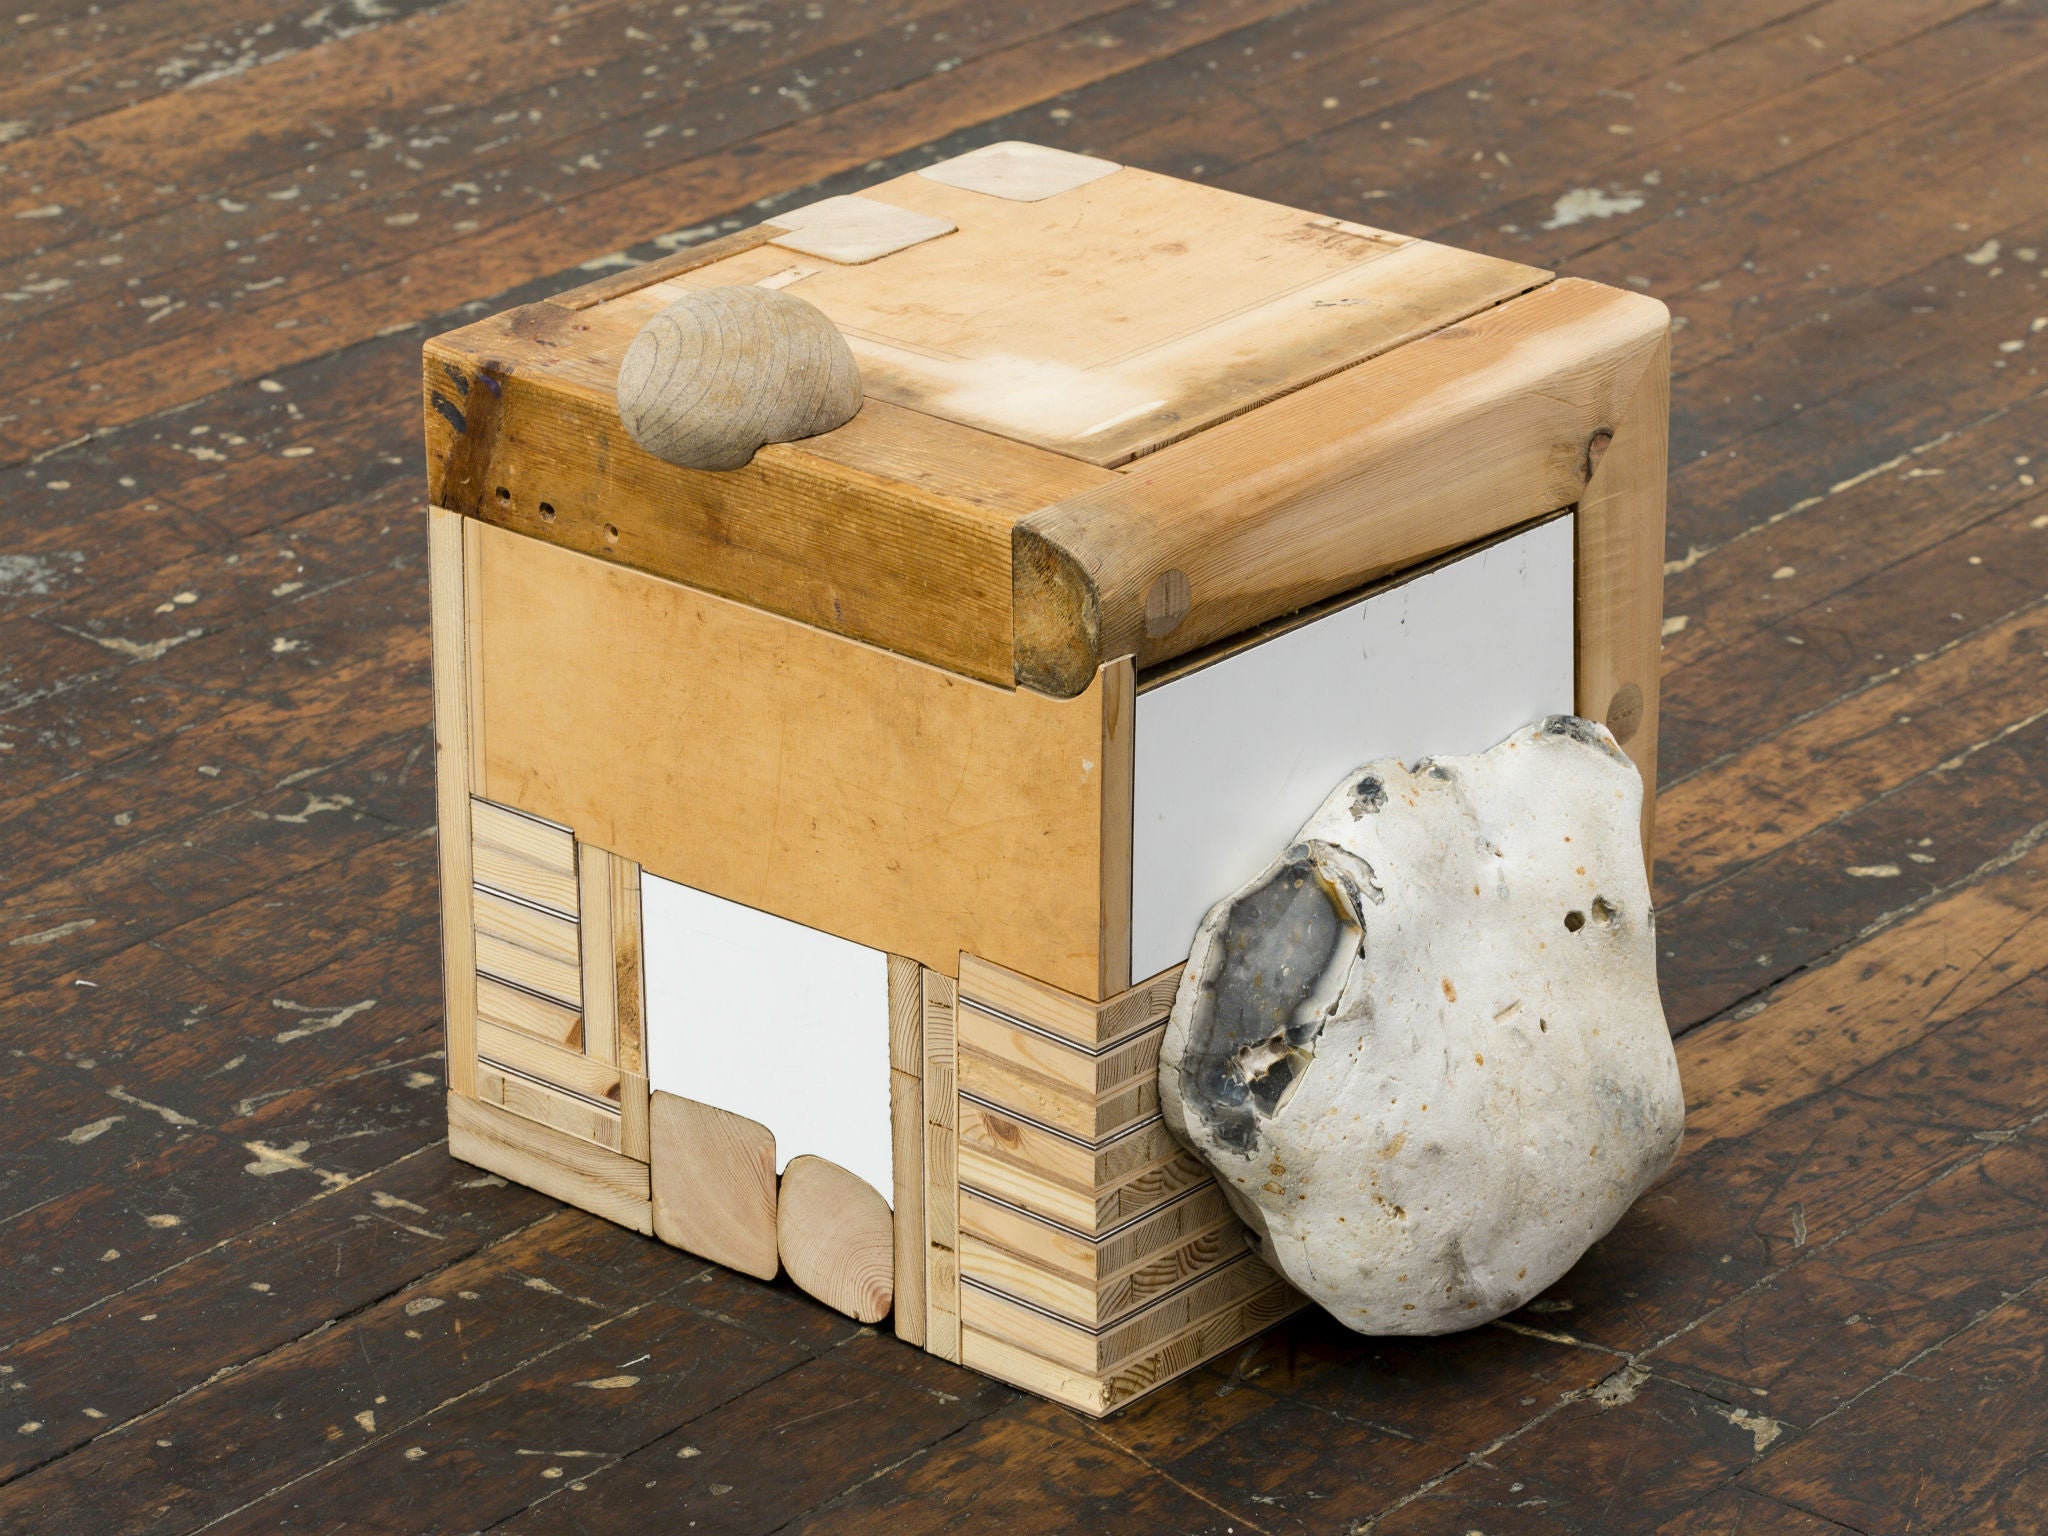 Stones on our table, in the smallest dimensions, by Lucy Skaer, a piece worked on by Simon Harlow (Nick Knight)